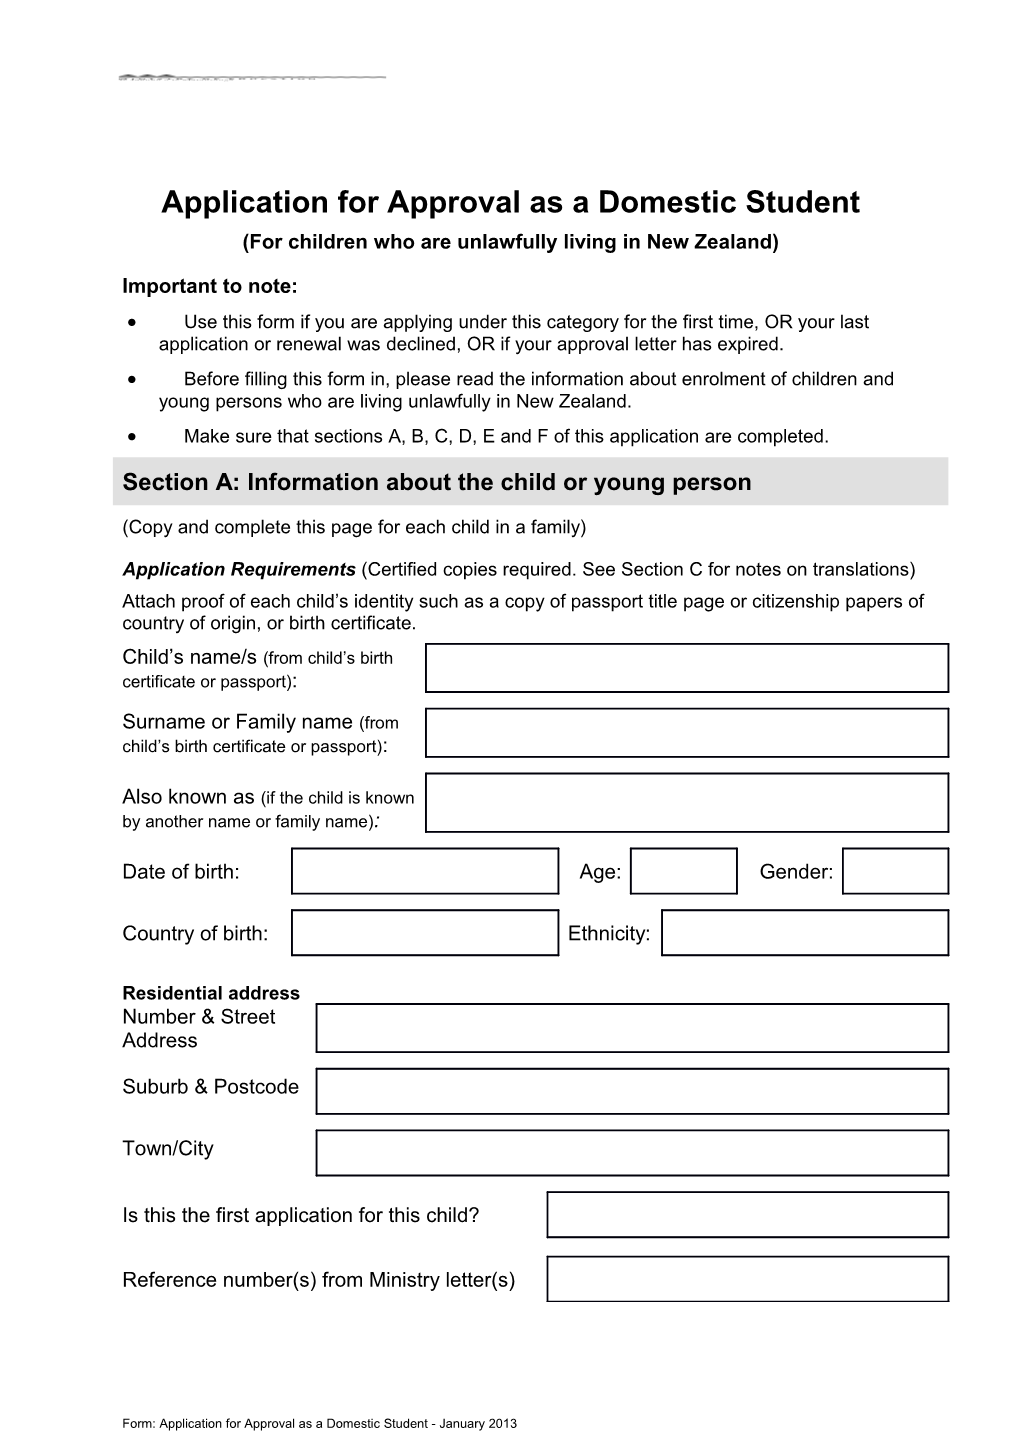 Application for Approval As a Domestic Student